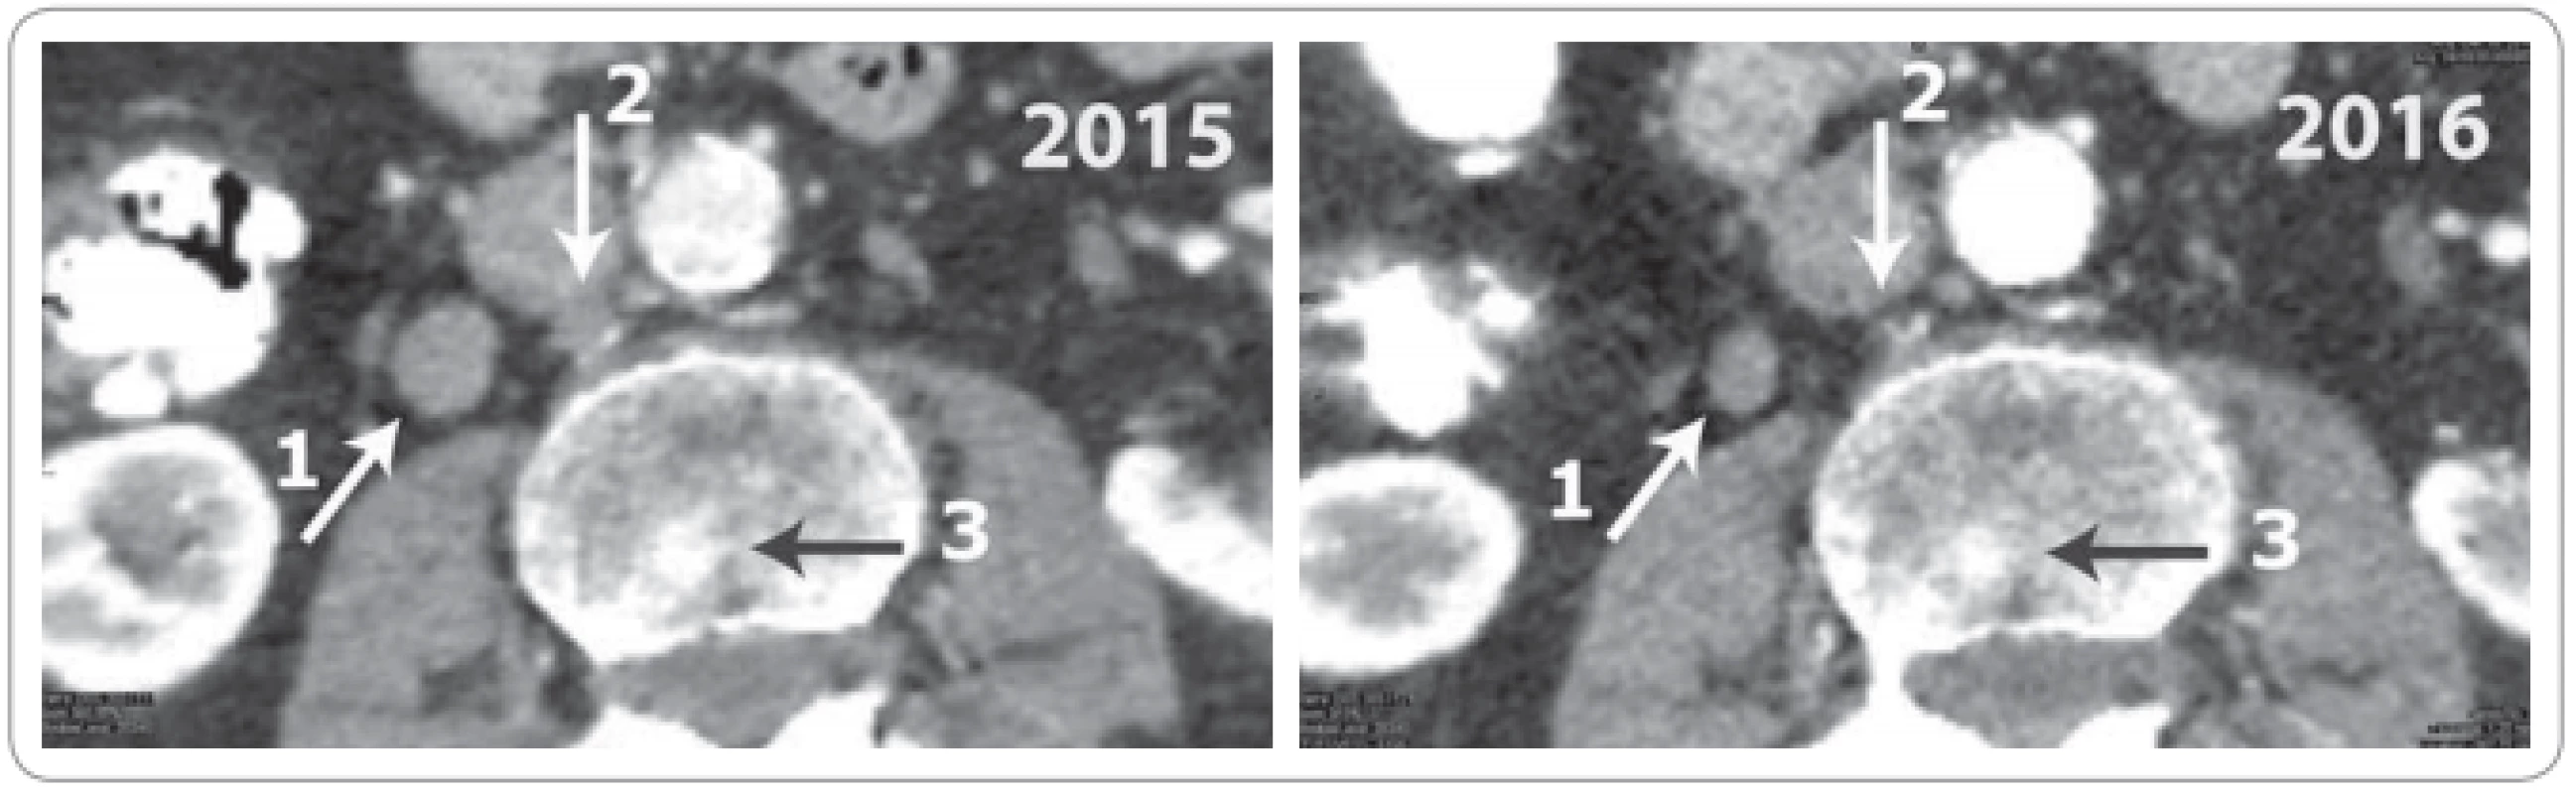 Abdominal CT scan in 2015 (left panel) and 2016 (right panel).